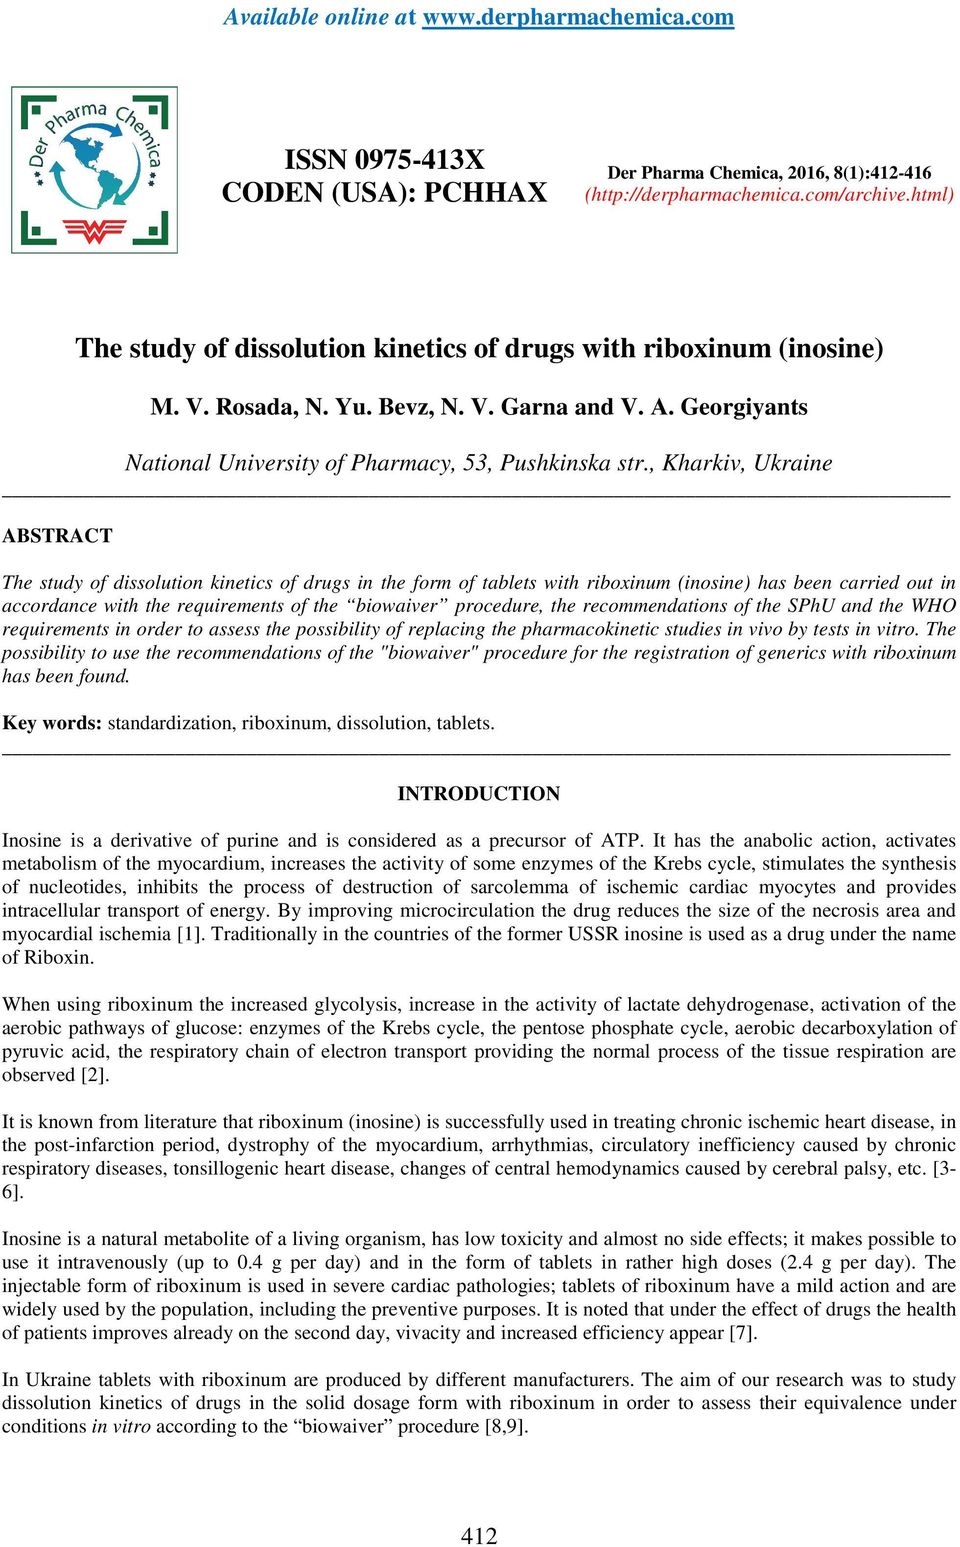 , Kharkiv, Ukraine ABSTRACT The study of dissolution kinetics of drugs in the form of tablets with riboxinum (inosine) has been carried out in accordance with the requirements of the biowaiver